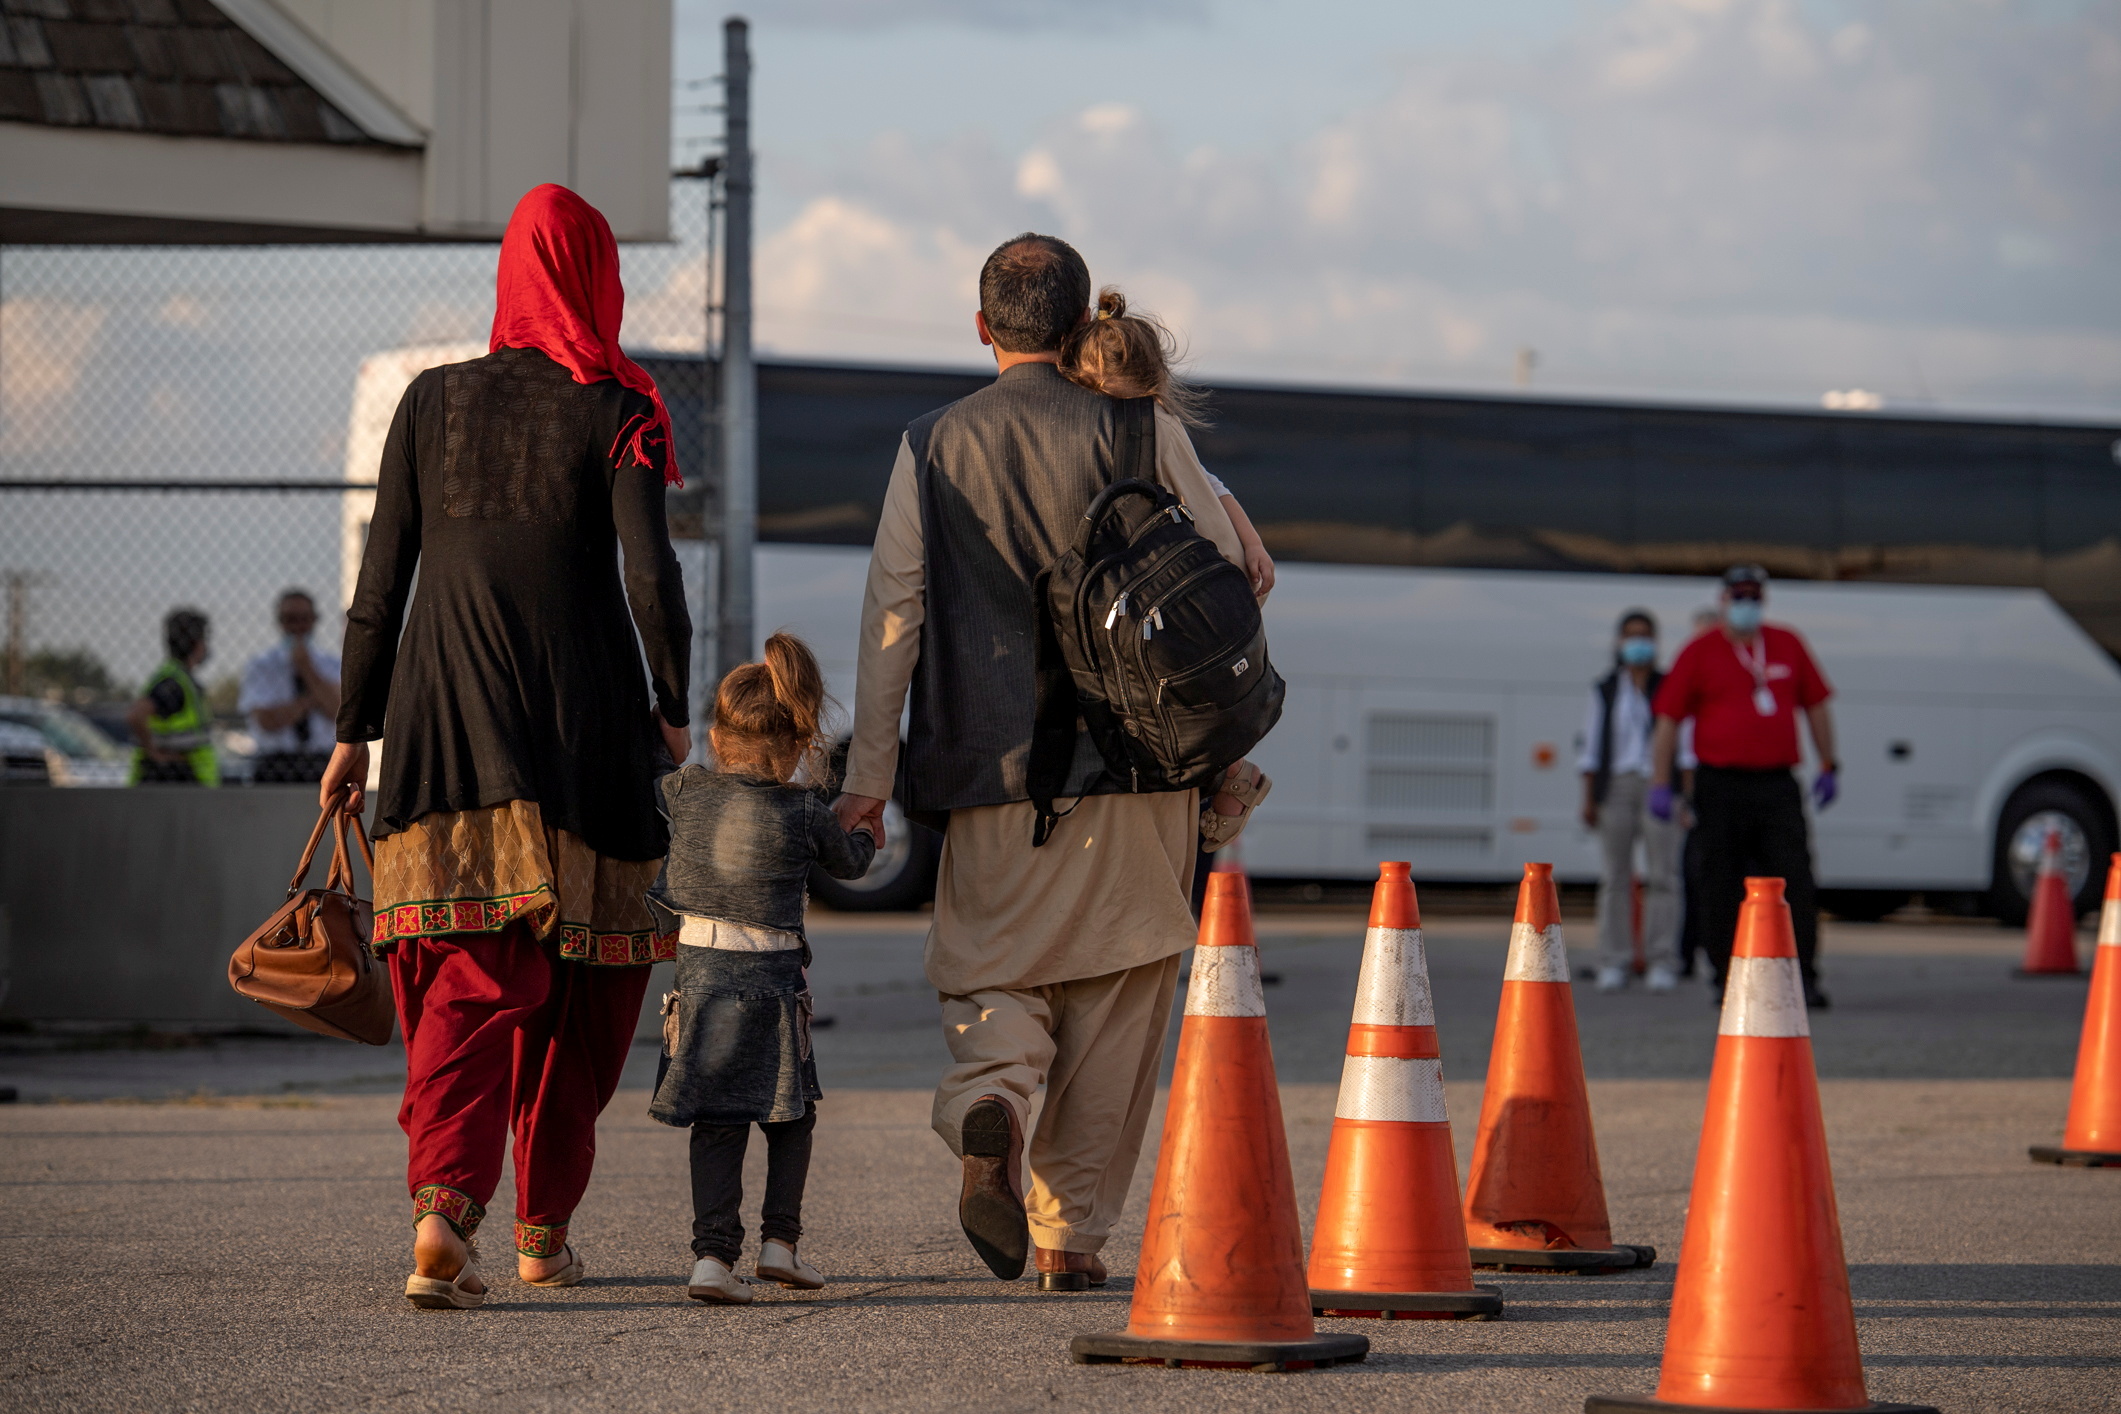 Afghan refugees who supported Canada's mission in Afghanistan prepare to board buses after arriving in Canada, at Toronto Pearson International Airport August 24, 2021. Picture taken August 24, 2021. MCpl Genevieve Lapointe/ Canadian Forces Combat Camera/Canadian Armed Forces Photo/Handout via REUTERS 